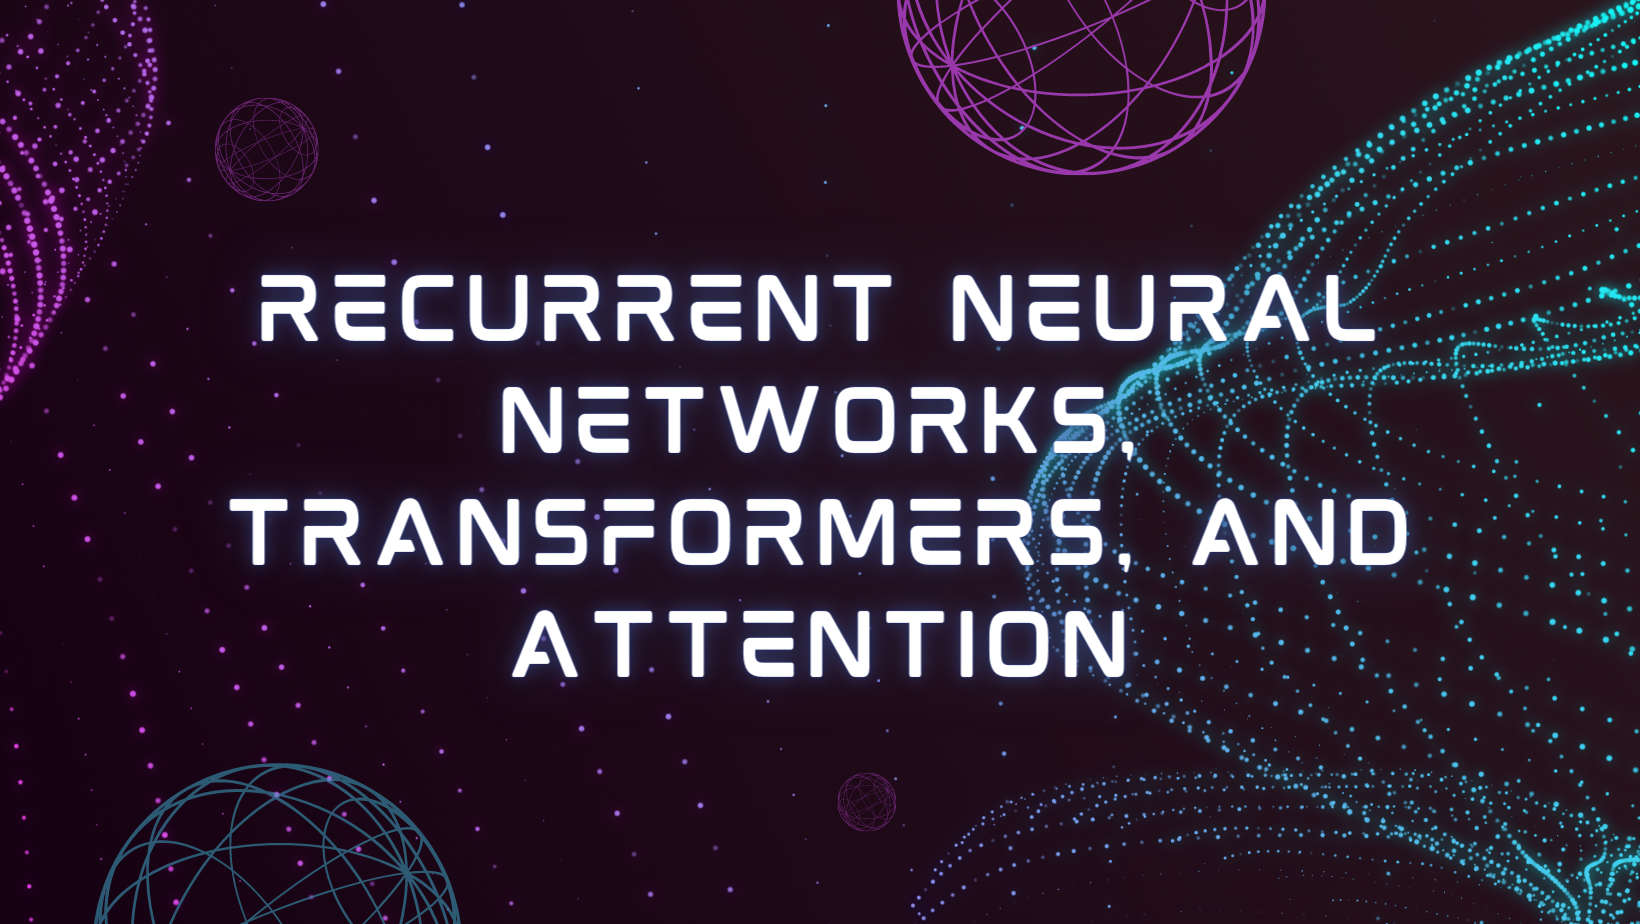 Recurrent Neural Networks, Transformers, and Attention